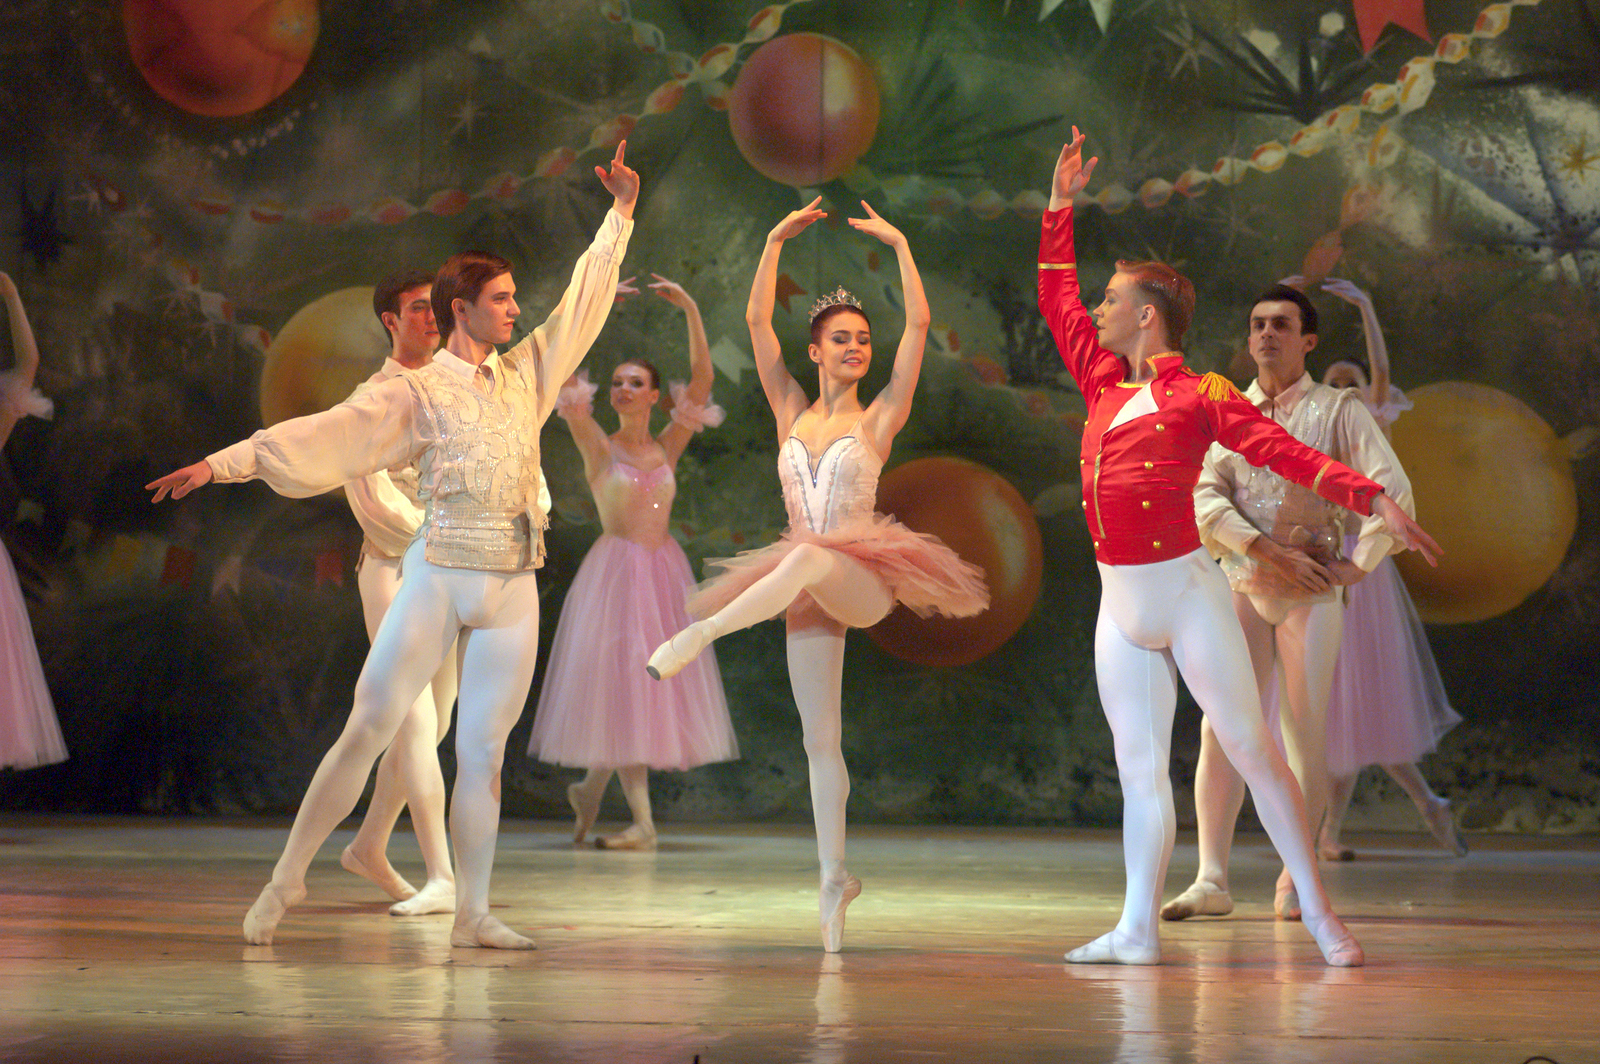 1892 The Nutcracker makes it debut in St. Petersburg, Russia